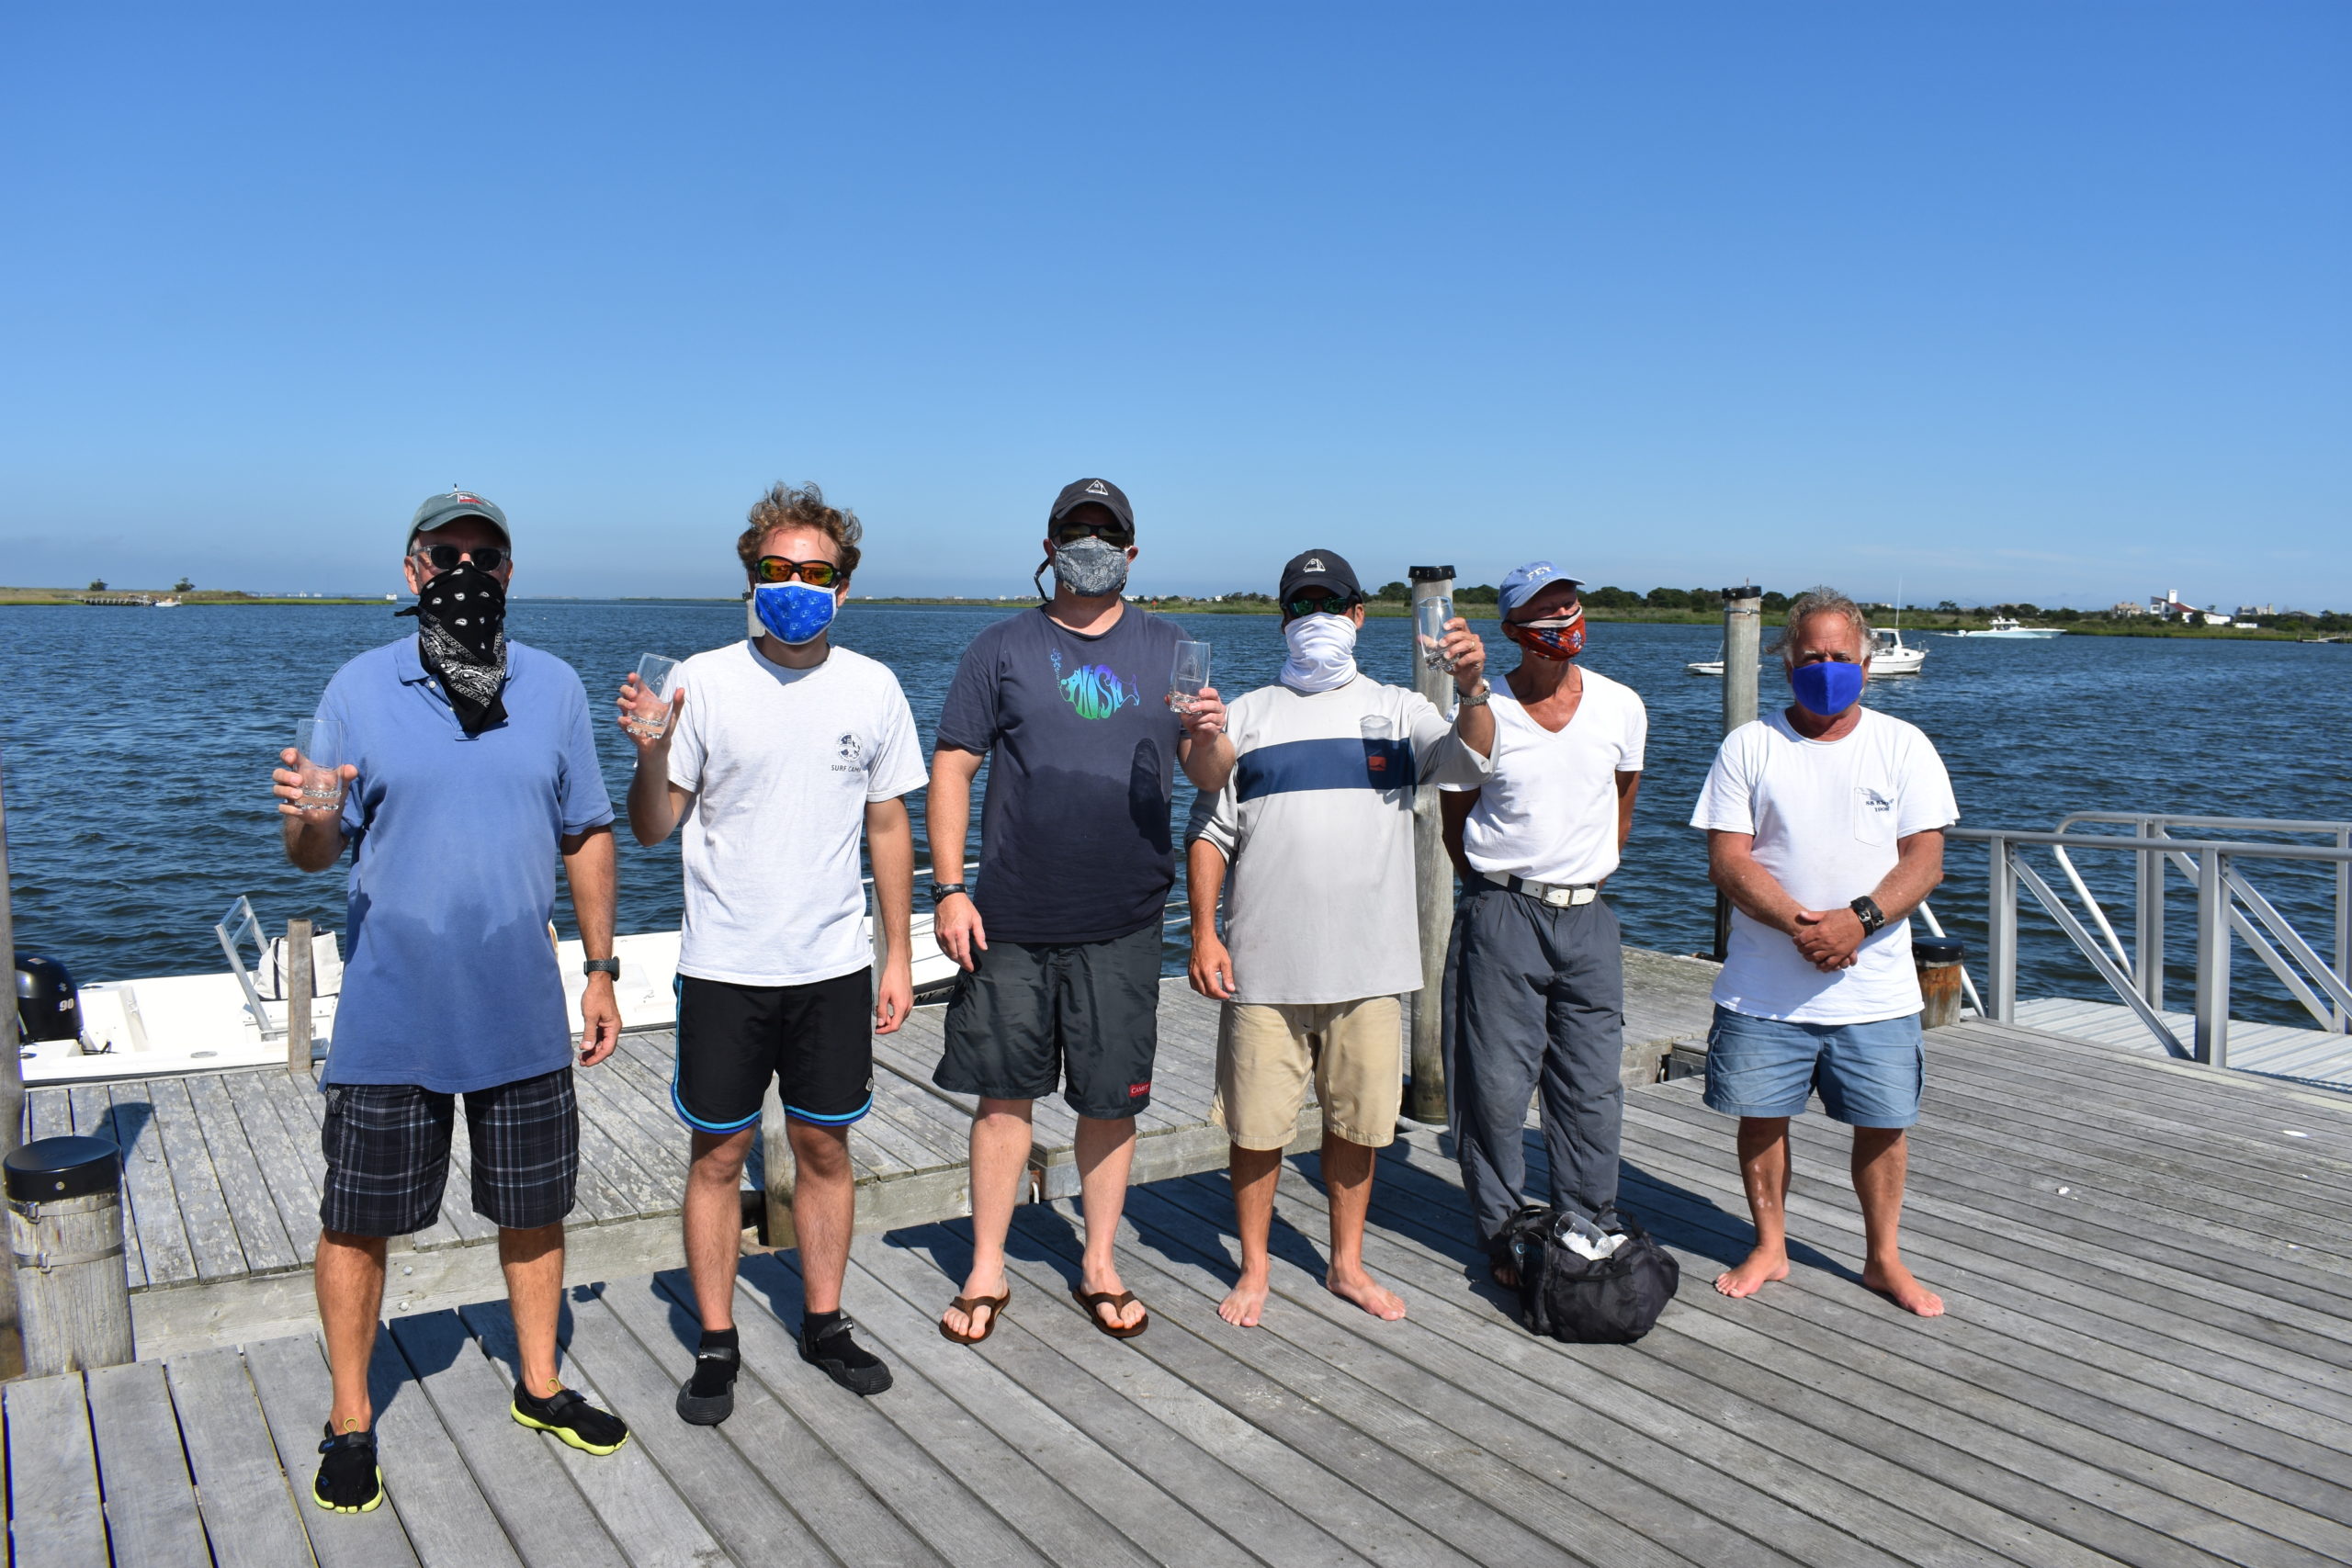 The SS Class Association Championship Regatta sailors who placed in the 2020 competition. Pictured from left to right are Brent and Luke Camery (third place); John Sartorius and Peter Schellbach (second place); and Jimmy Ewing and Rob Dudley (First place)